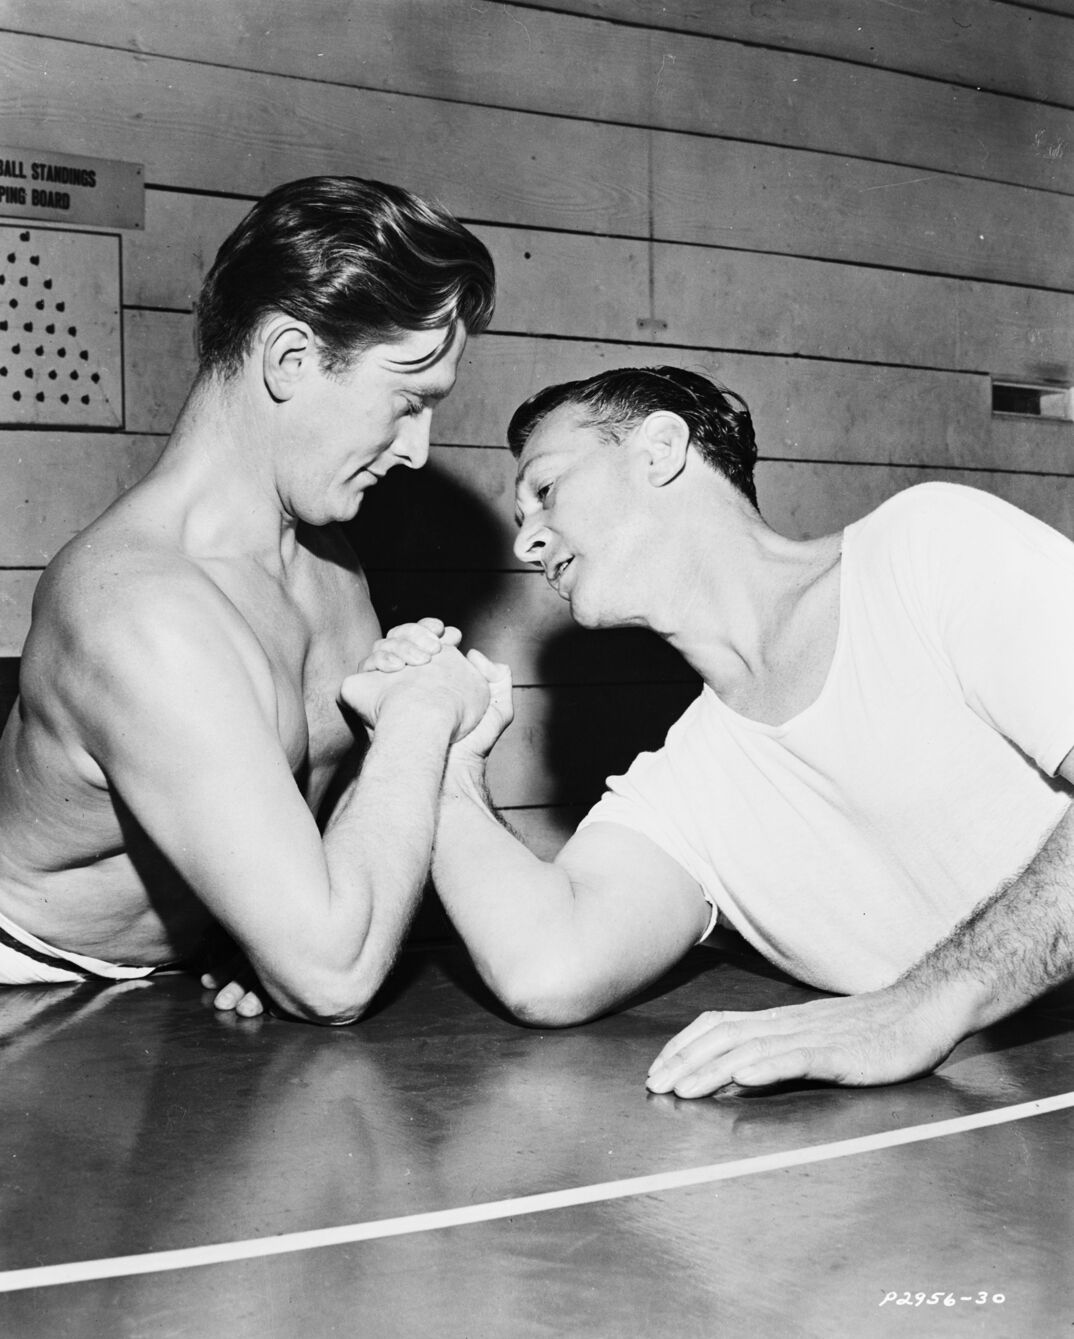 Black-and-white image. In a wood paneled room, two men rest their arms on a sleek table armwrestling. The man on the left is shirtless with slicked back hair. The man on the right wears a white t-shirt and rests his other arm on the tabletop for leverage.